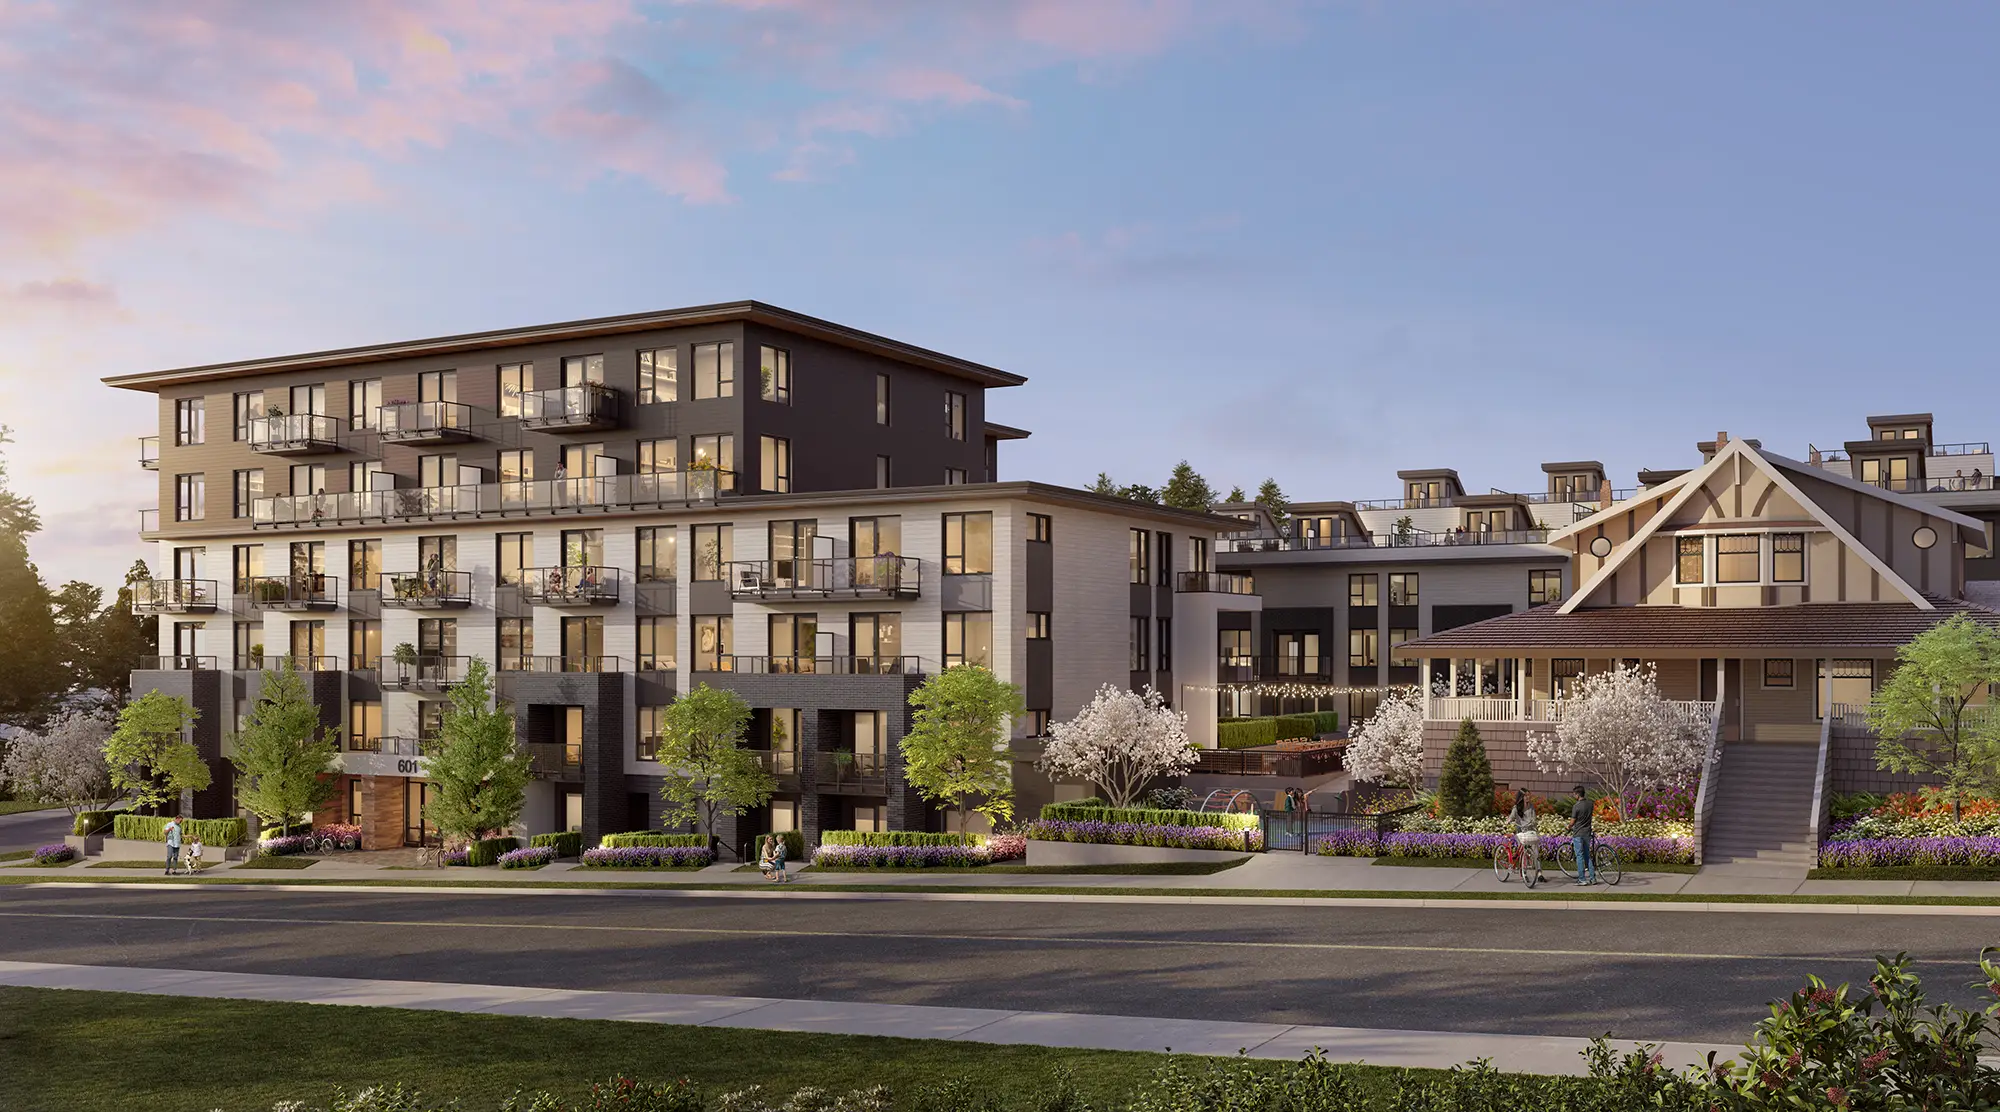 Lodana Coquitlam by The Circadian Group – Prices, Plans, Availability